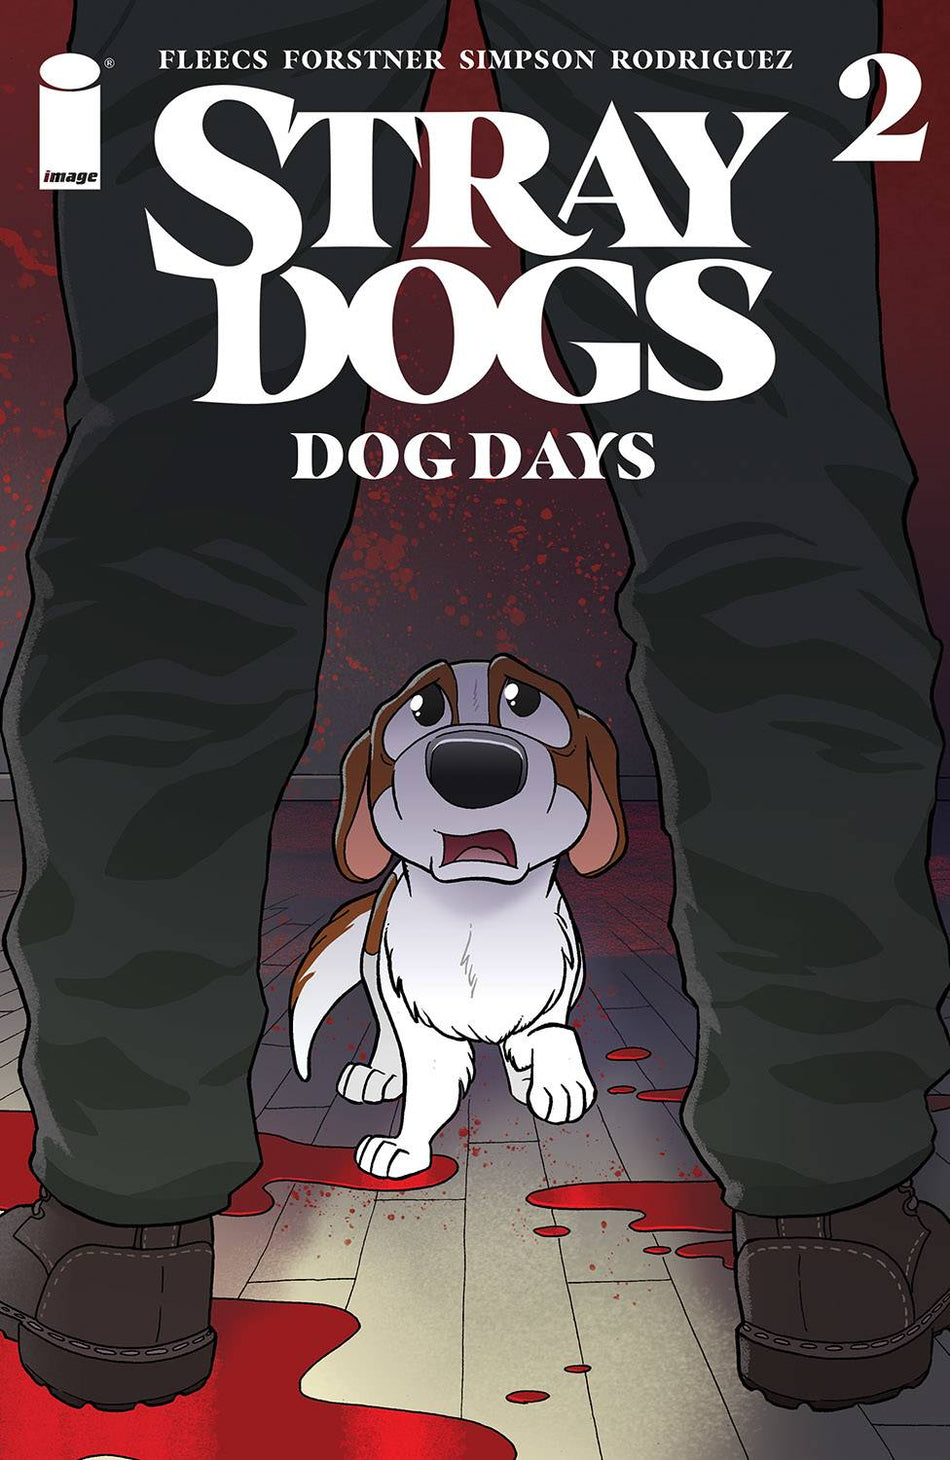 Photo of Stray Dogs Dog Days Issue 2 (of 2) CVR A Forstner & Fleecs comic sold by Stronghold Collectibles